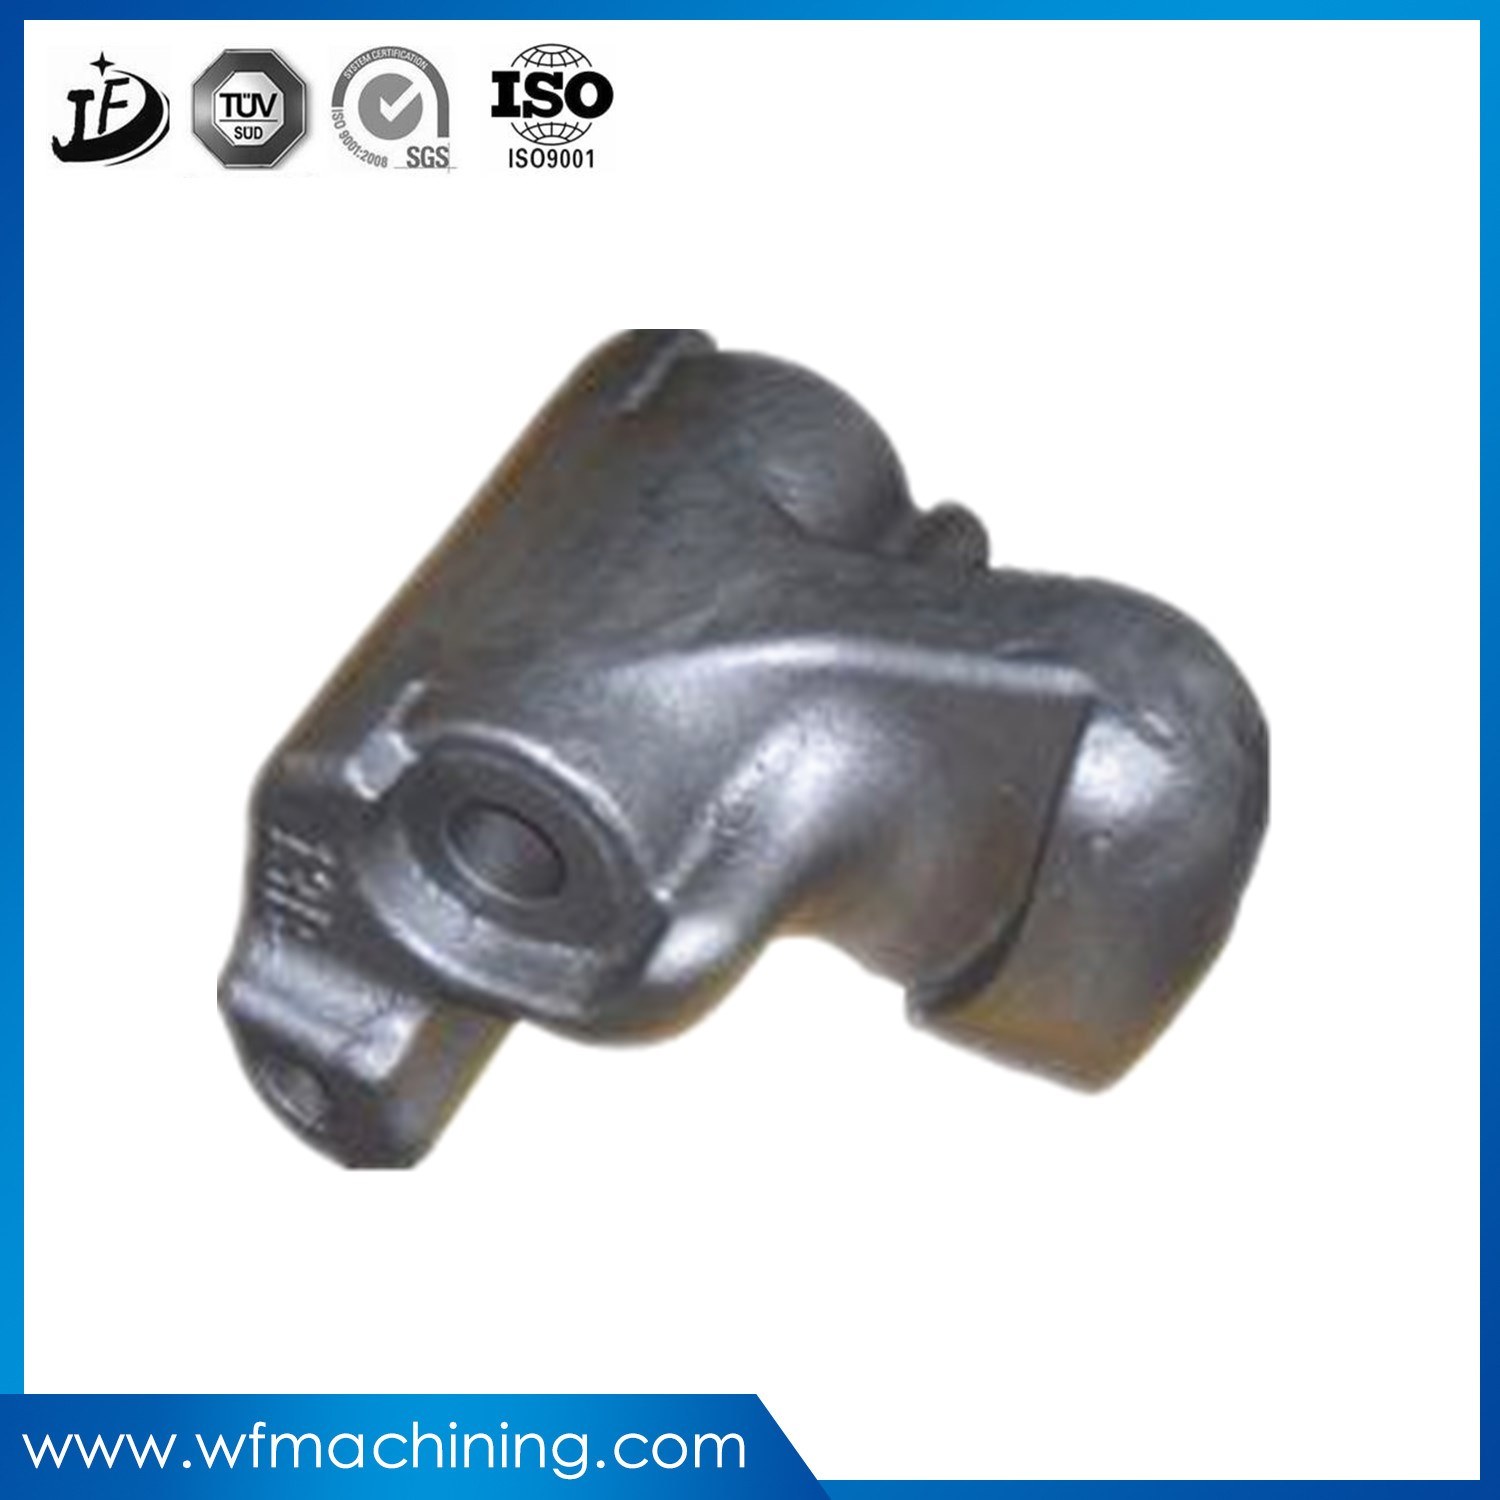 OEM Drop Forged Stainless Steel Forging Shackle with Forged Process